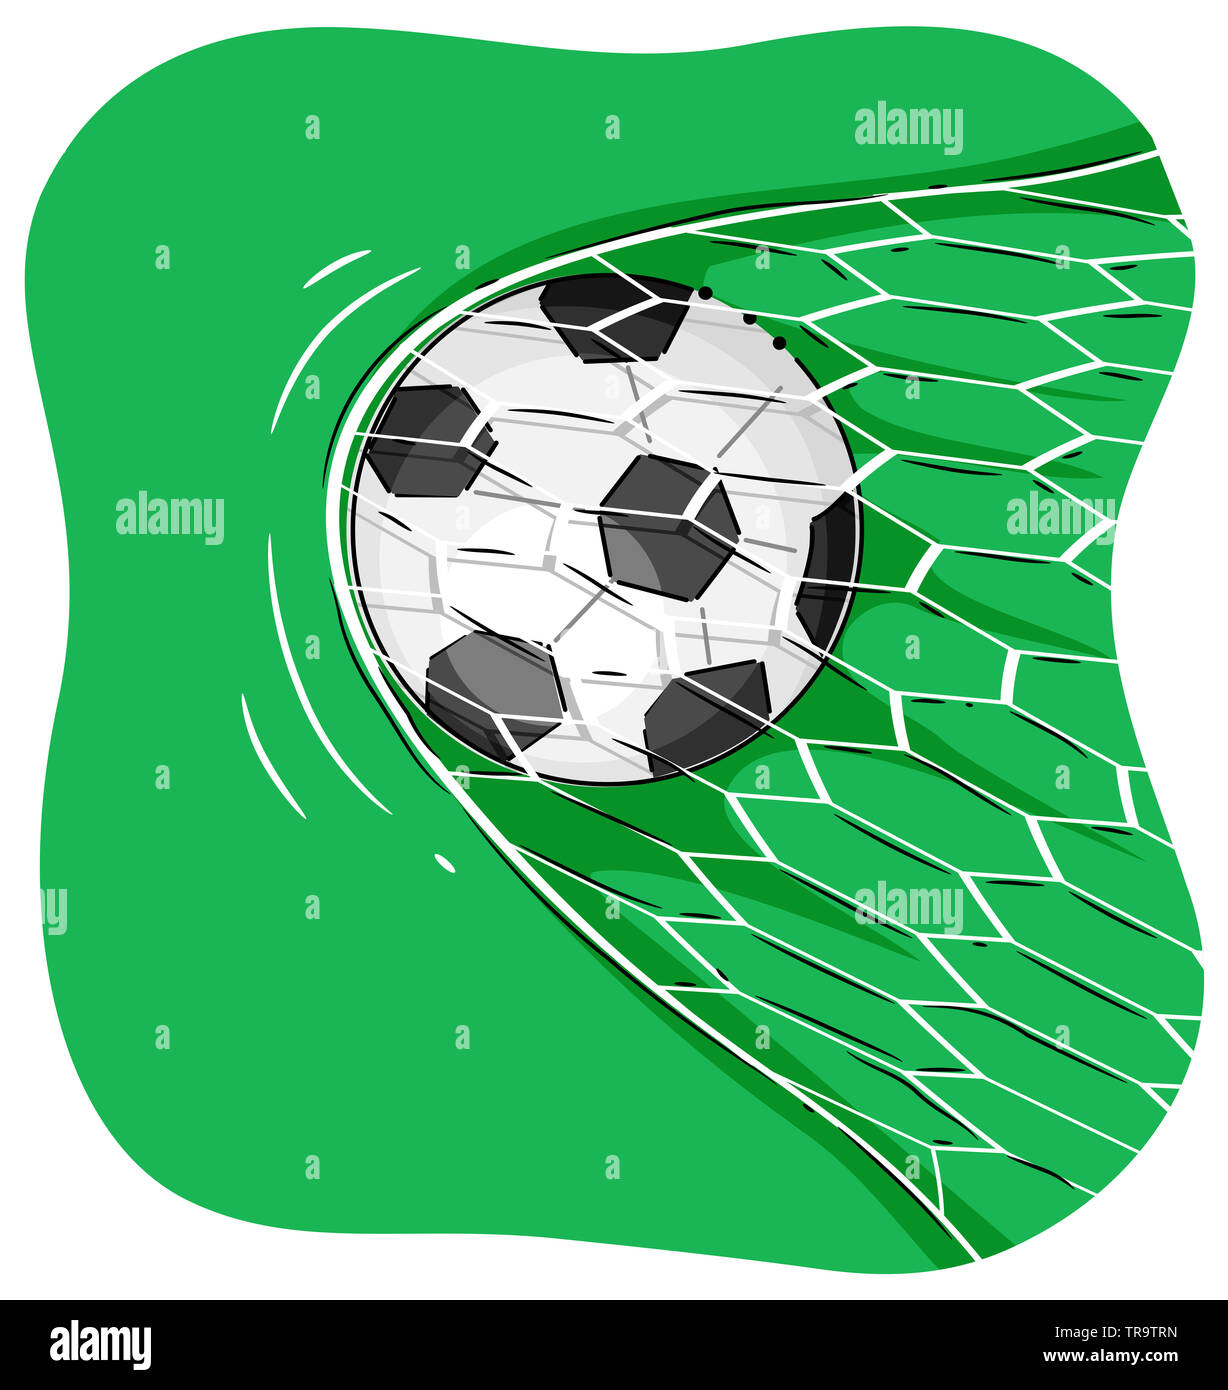 Illustration Of A Soccer Ball Hitting The Net And Scoring A Goal Stock Photo Alamy